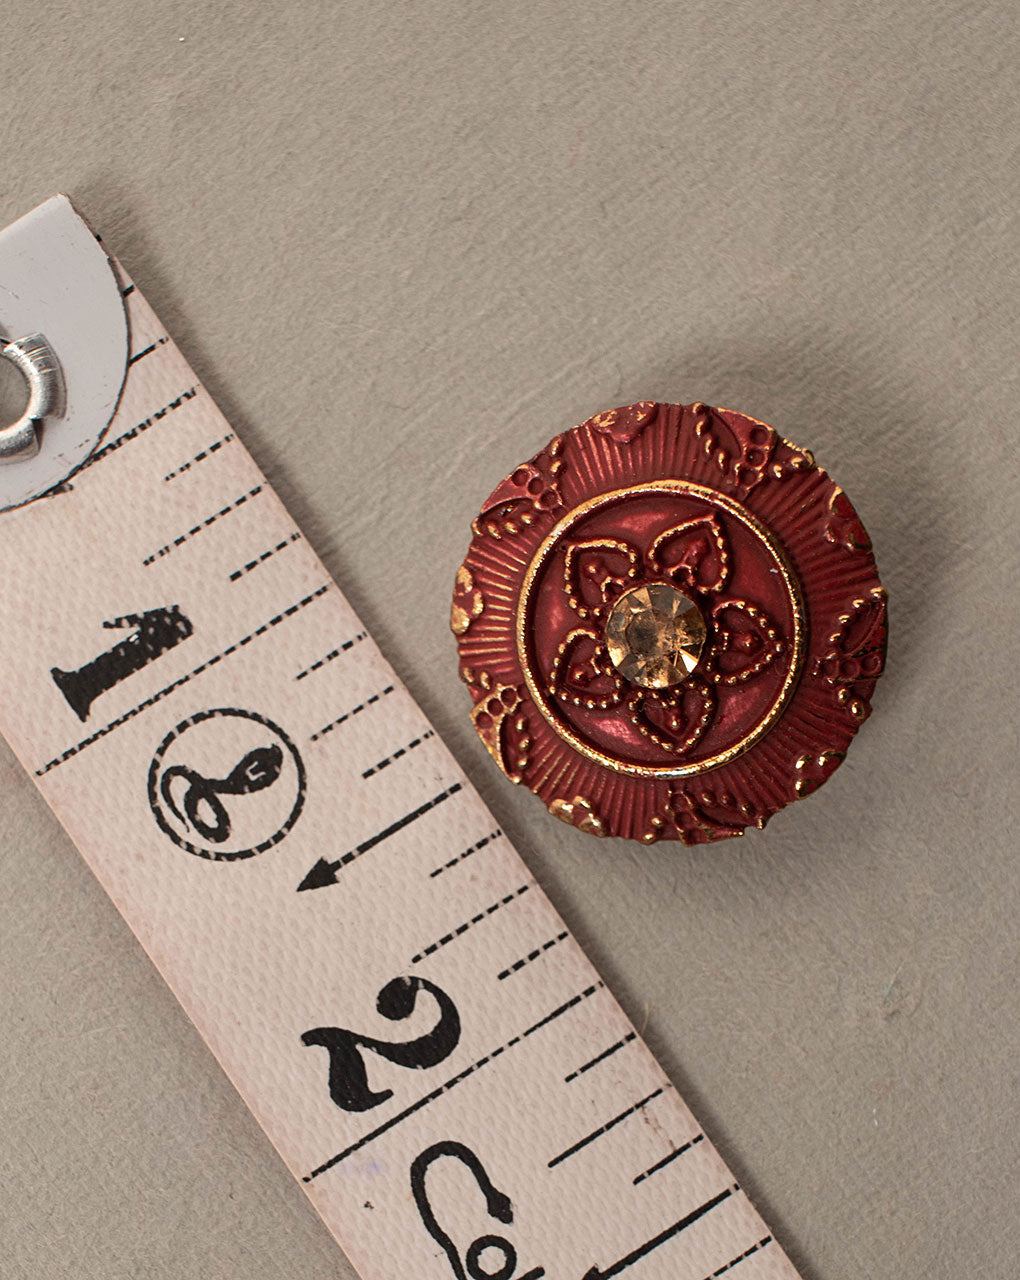 Traditional Metal Casting Button ( Set Of 6 ) - Fabriclore.com